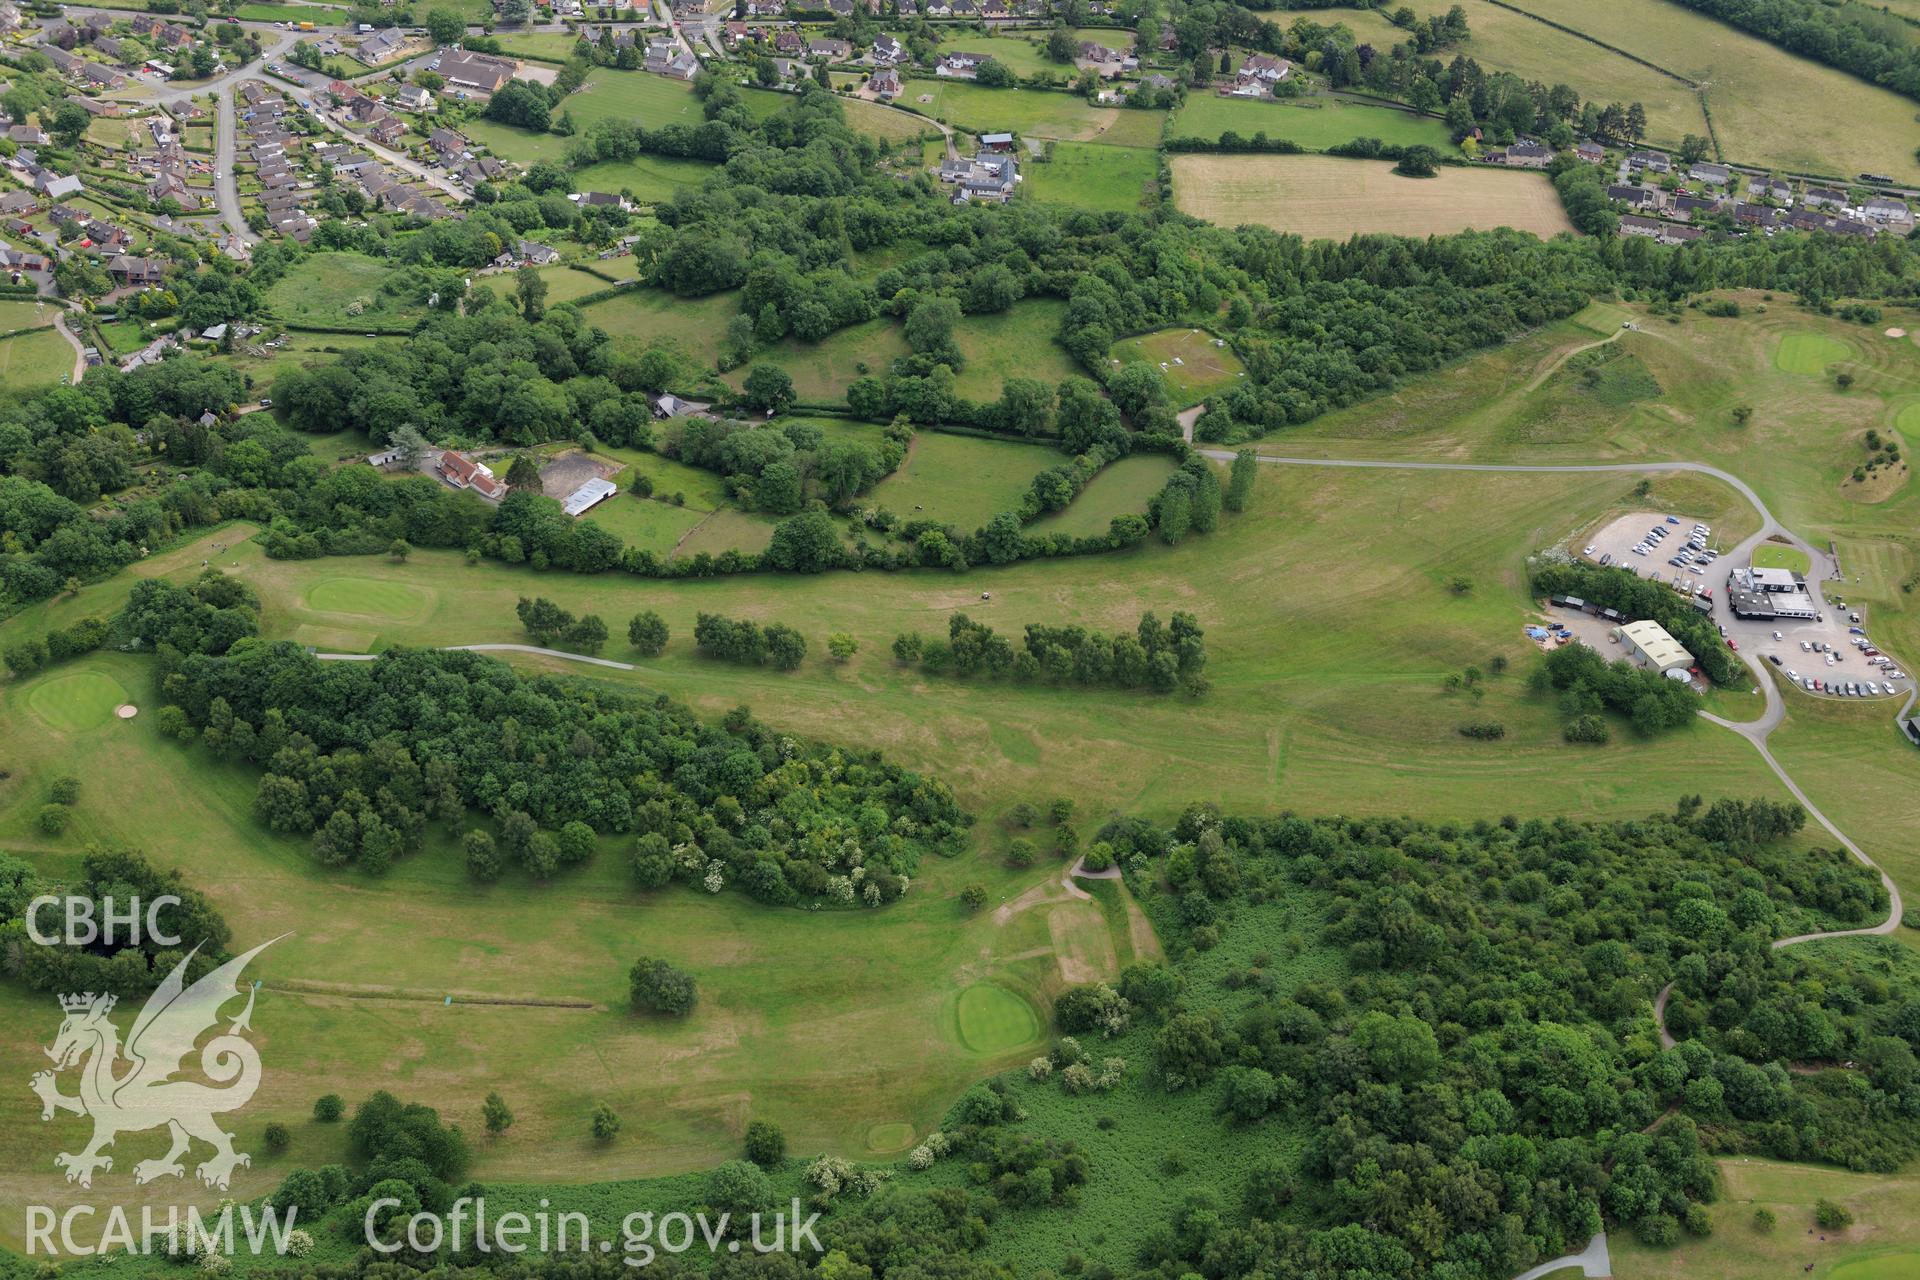 Llanymynech hillfort on the Welsh-English border, south west of Oswestry. Oblique aerial photograph taken during the Royal Commission's programme of archaeological aerial reconnaissance by Toby Driver on 30th June 2015.